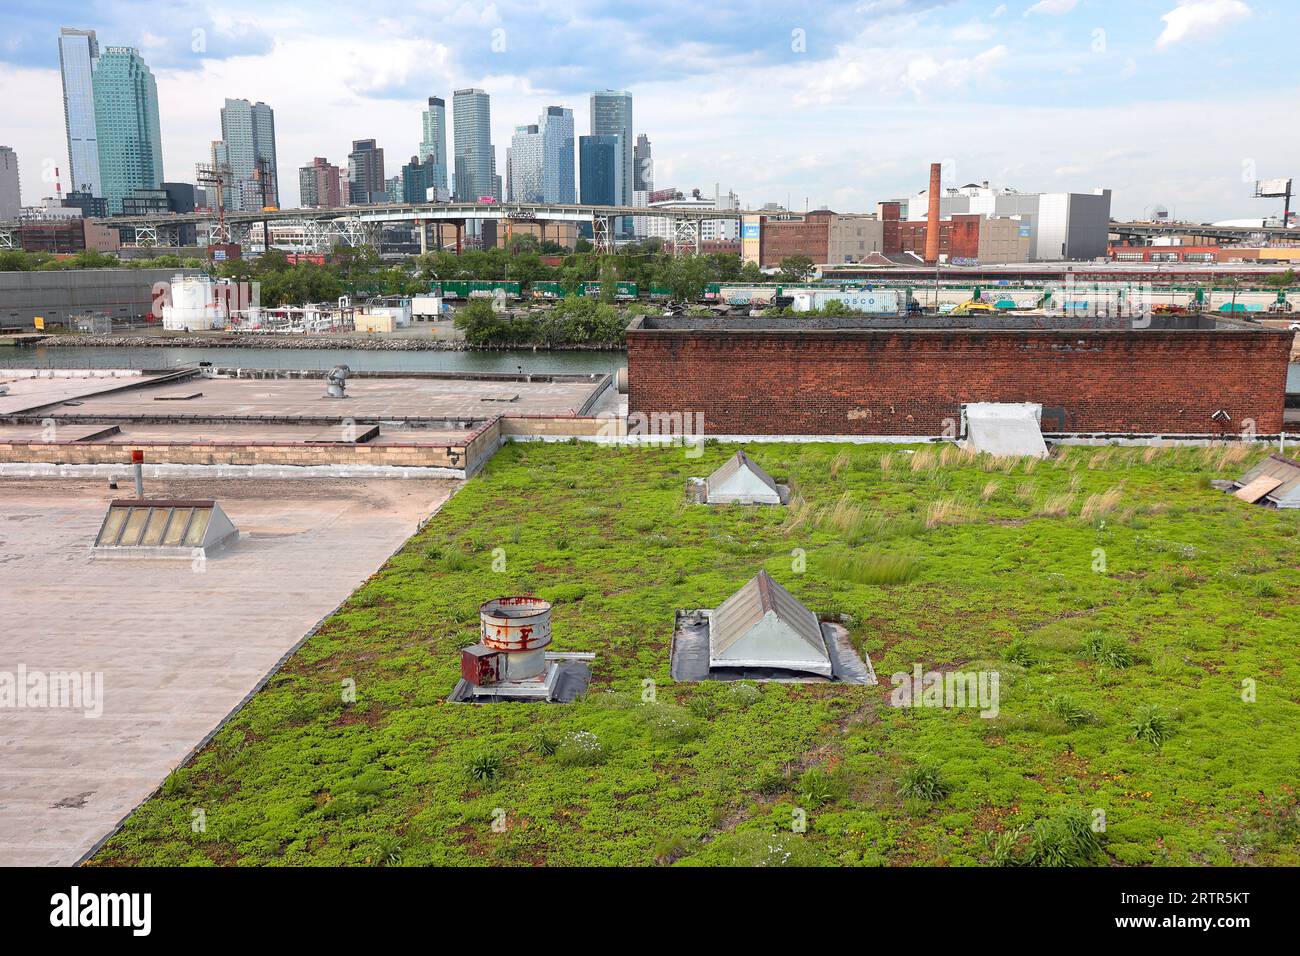 A green roof on a building in Greenpoint, Brooklyn looking north toward Long Island City. Green roofs help reduce urban heat island effect on cities. Stock Photo